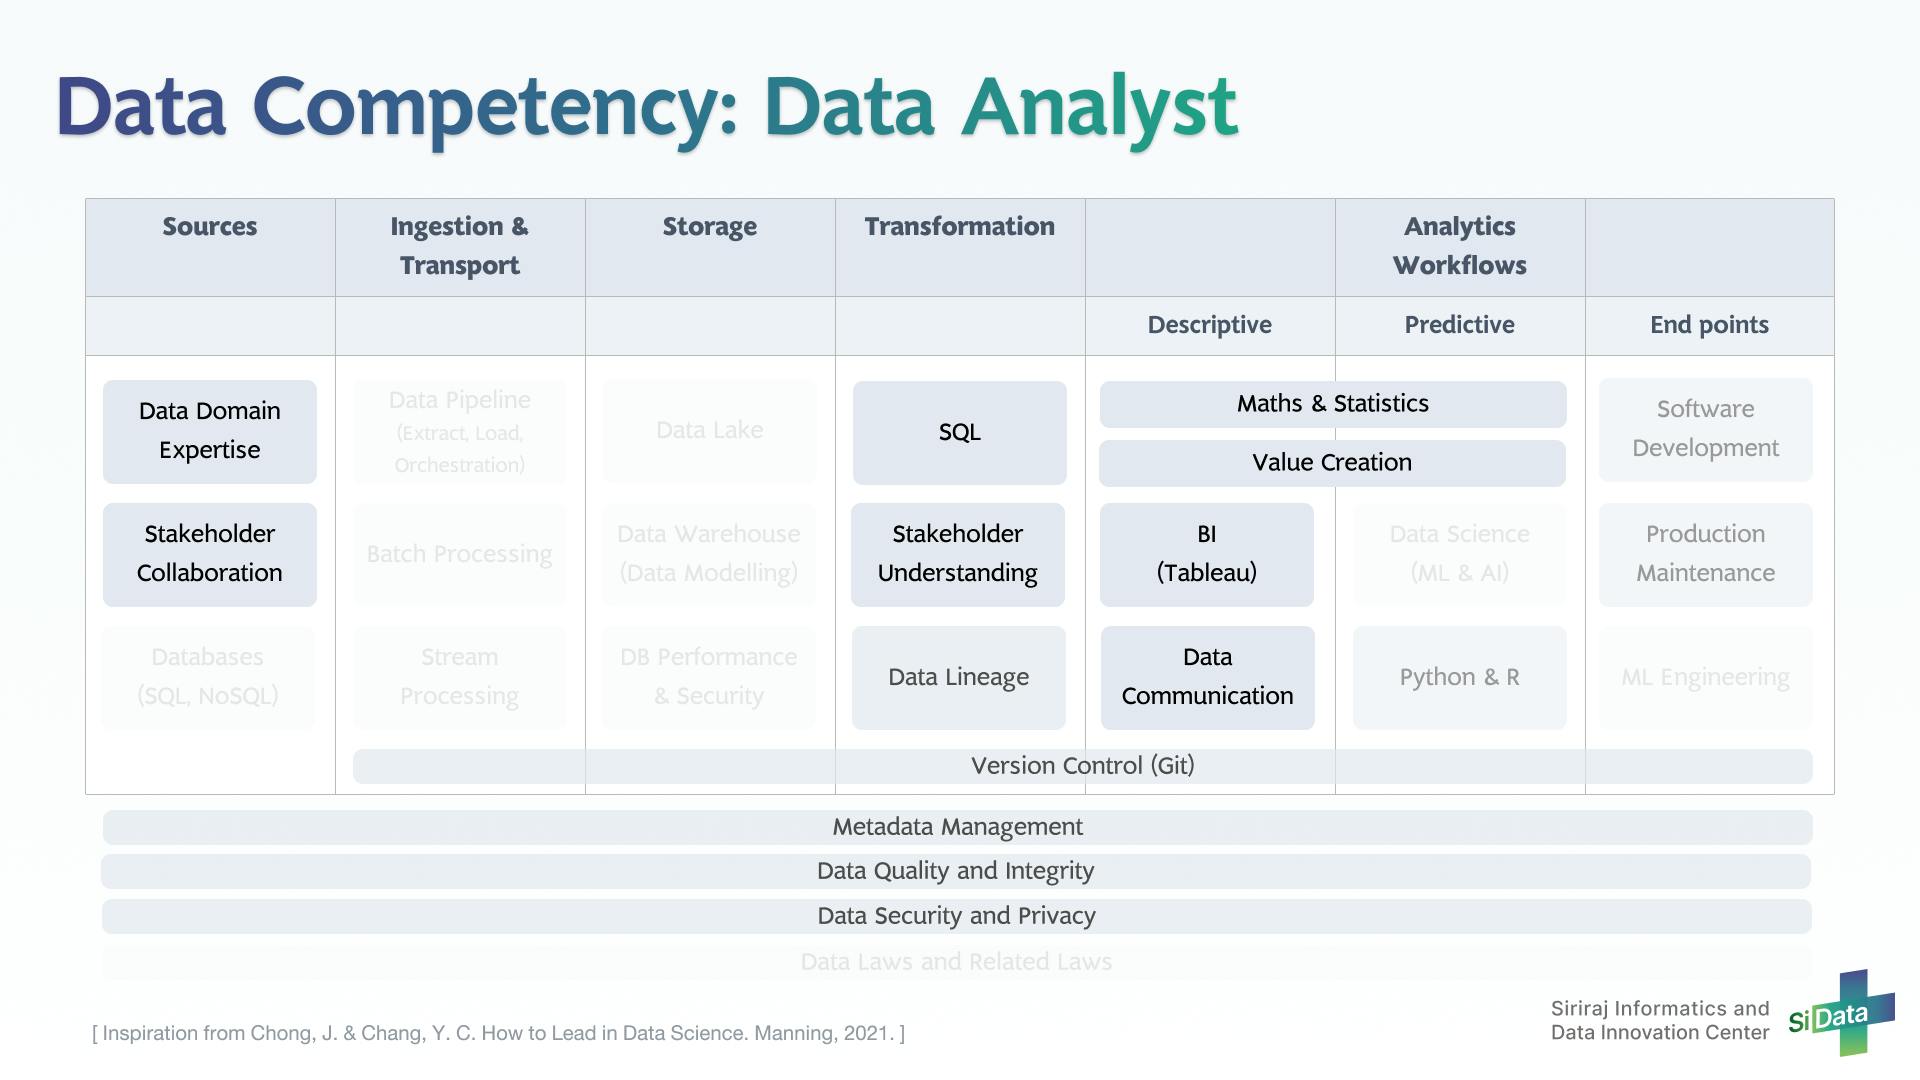 Data Competency_4 Data Analyst_20220425.png